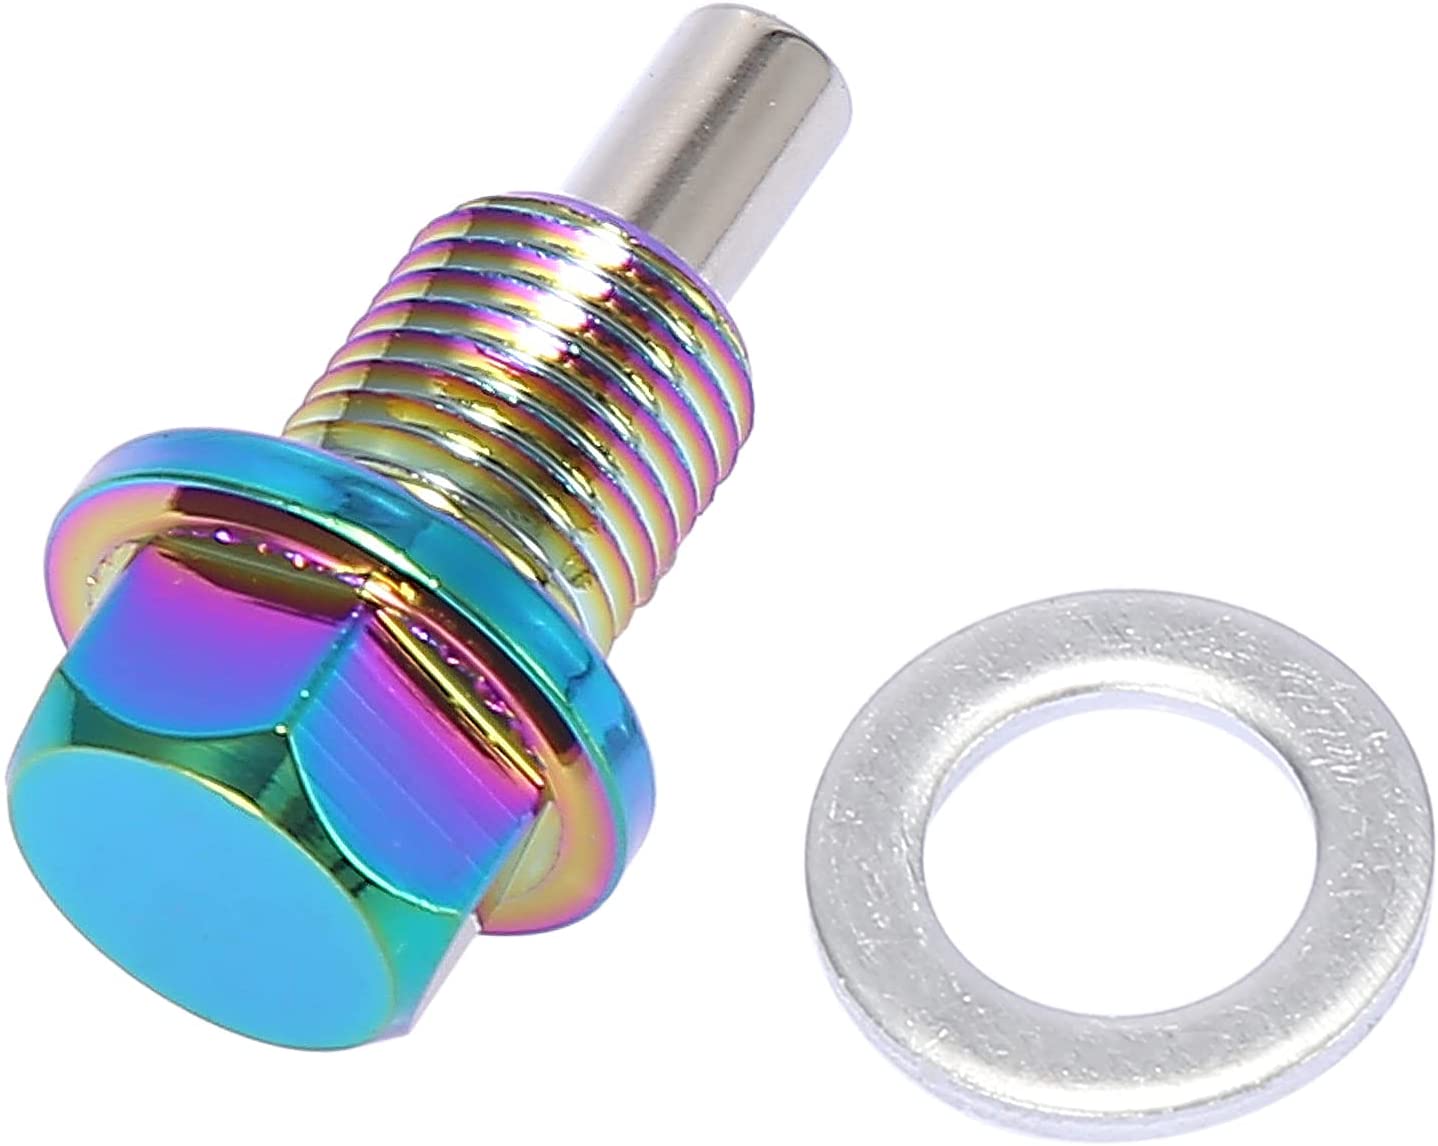 M12x1.25 Multicolor Magnetic Oil Drain Plug with Gaskets for Universal Car